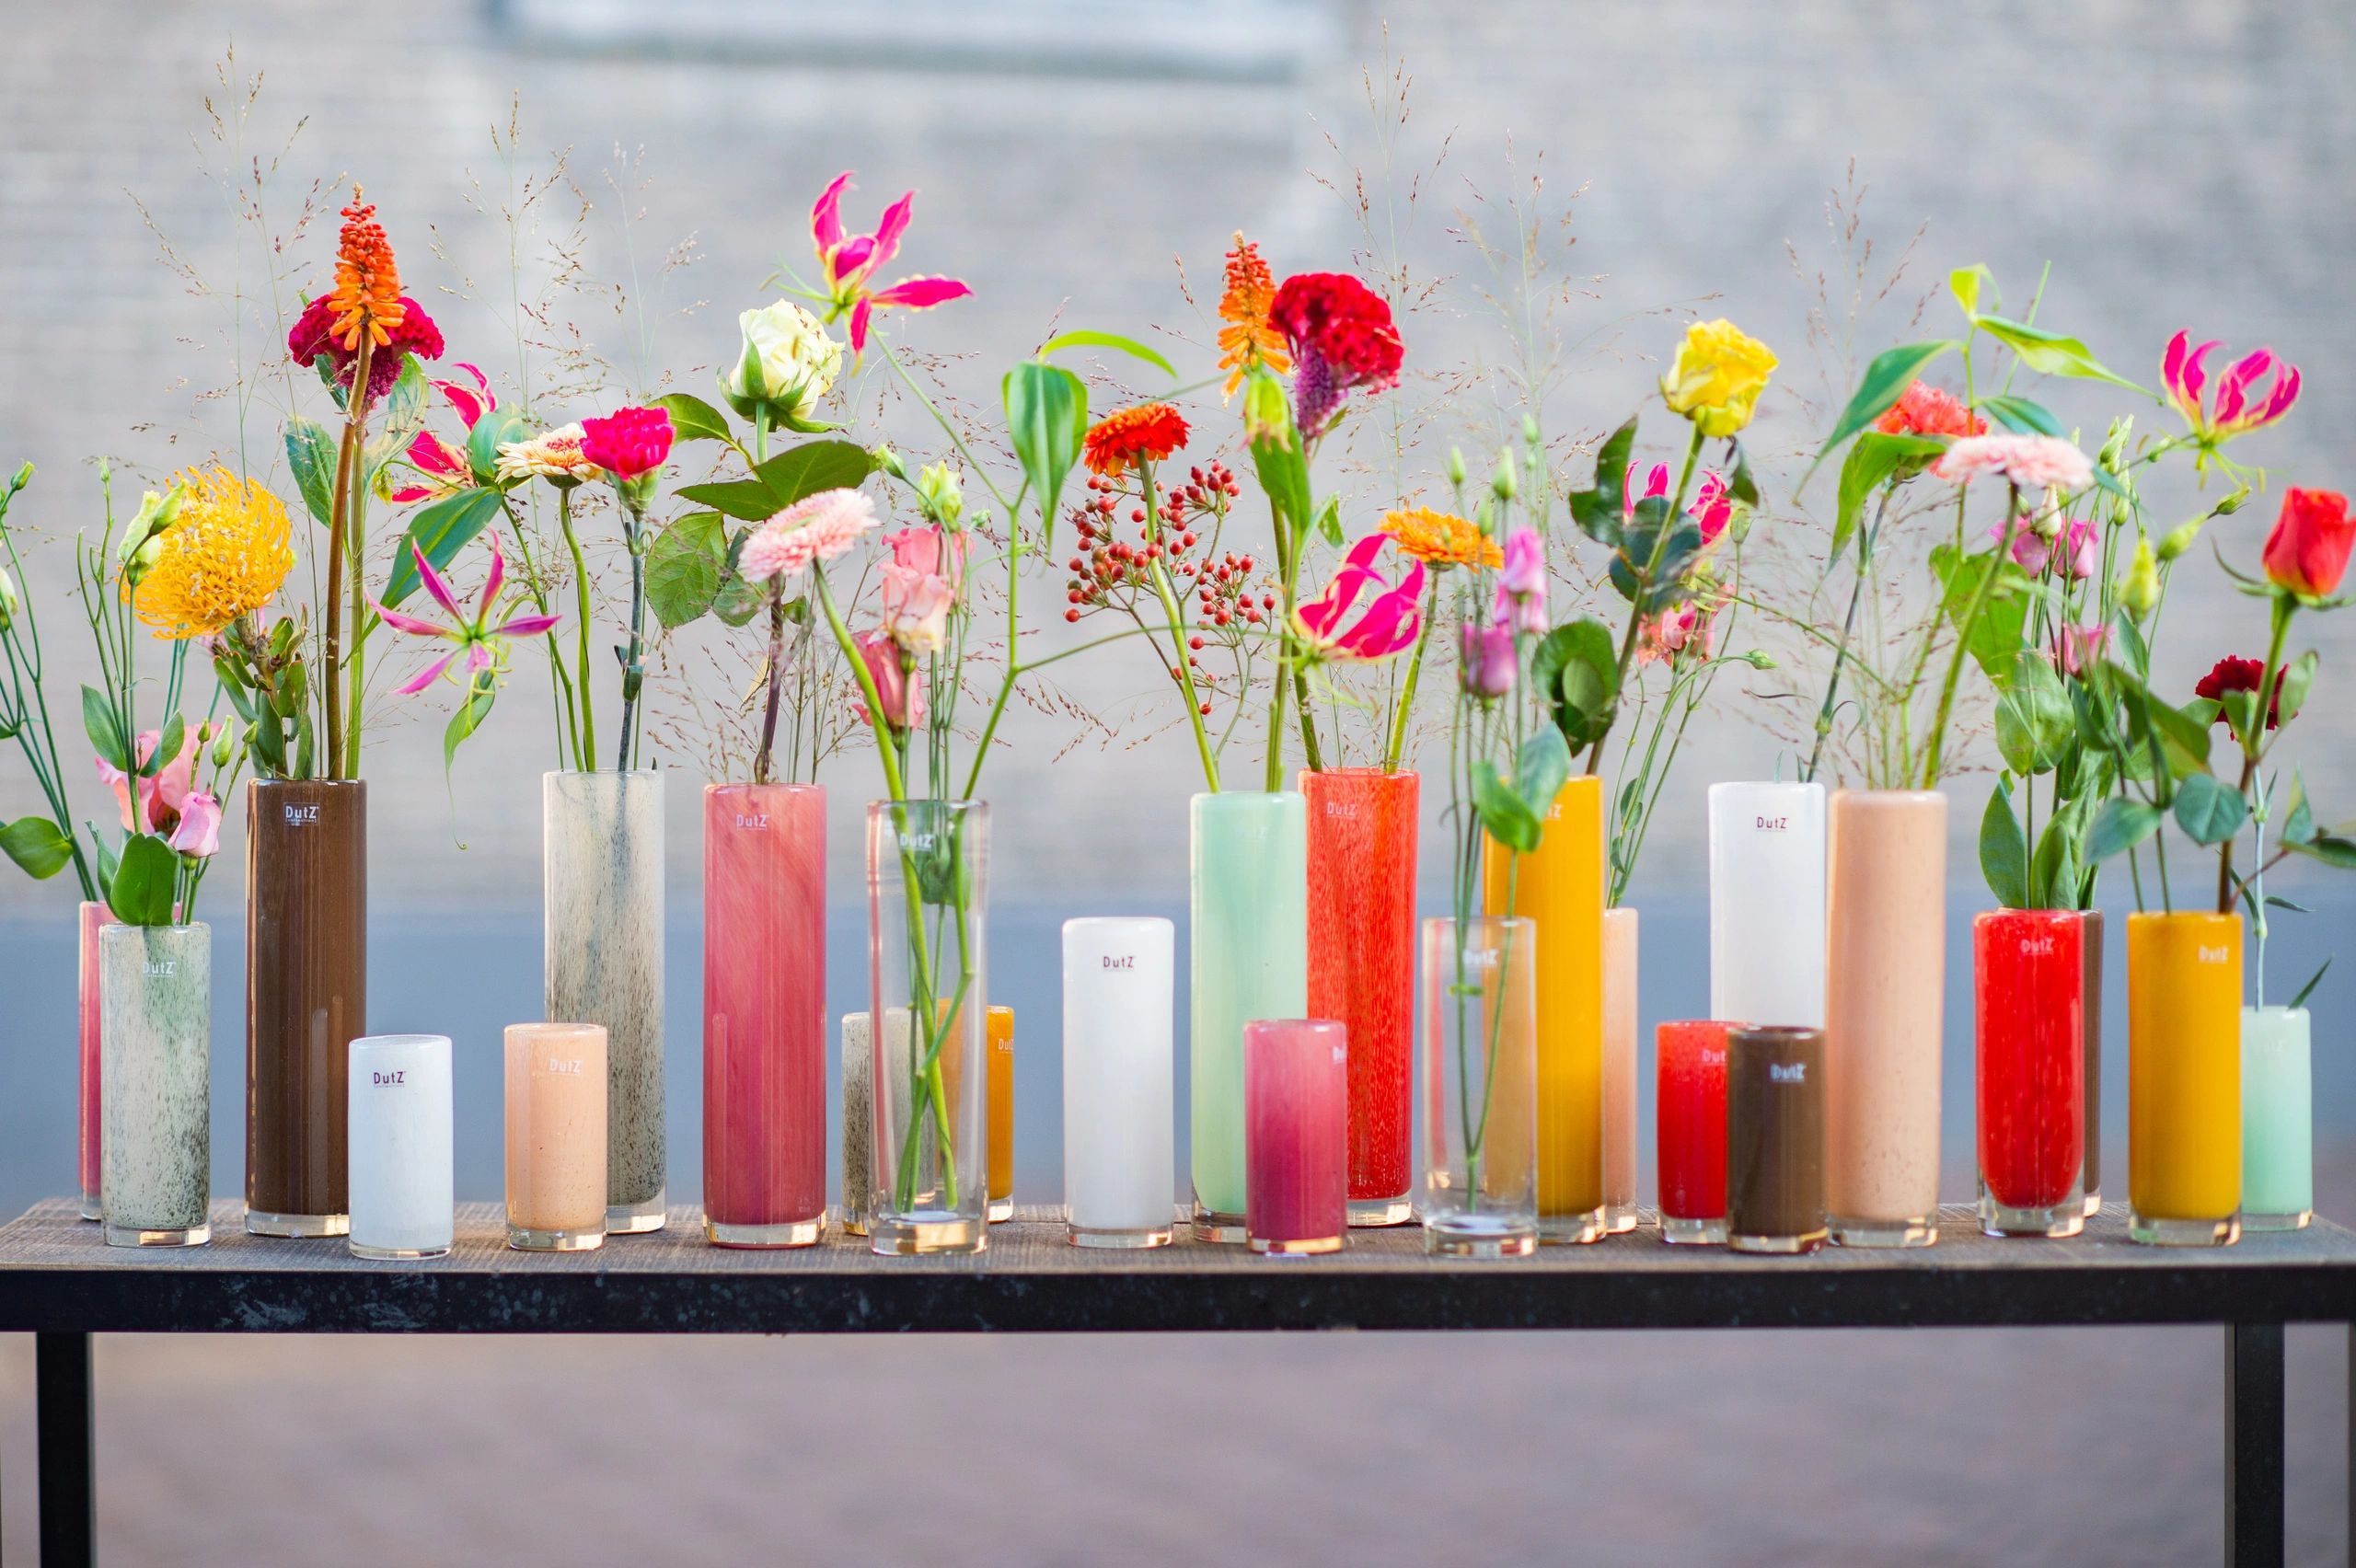 5 Reasons to fall in love with DutZ mouth blown vases